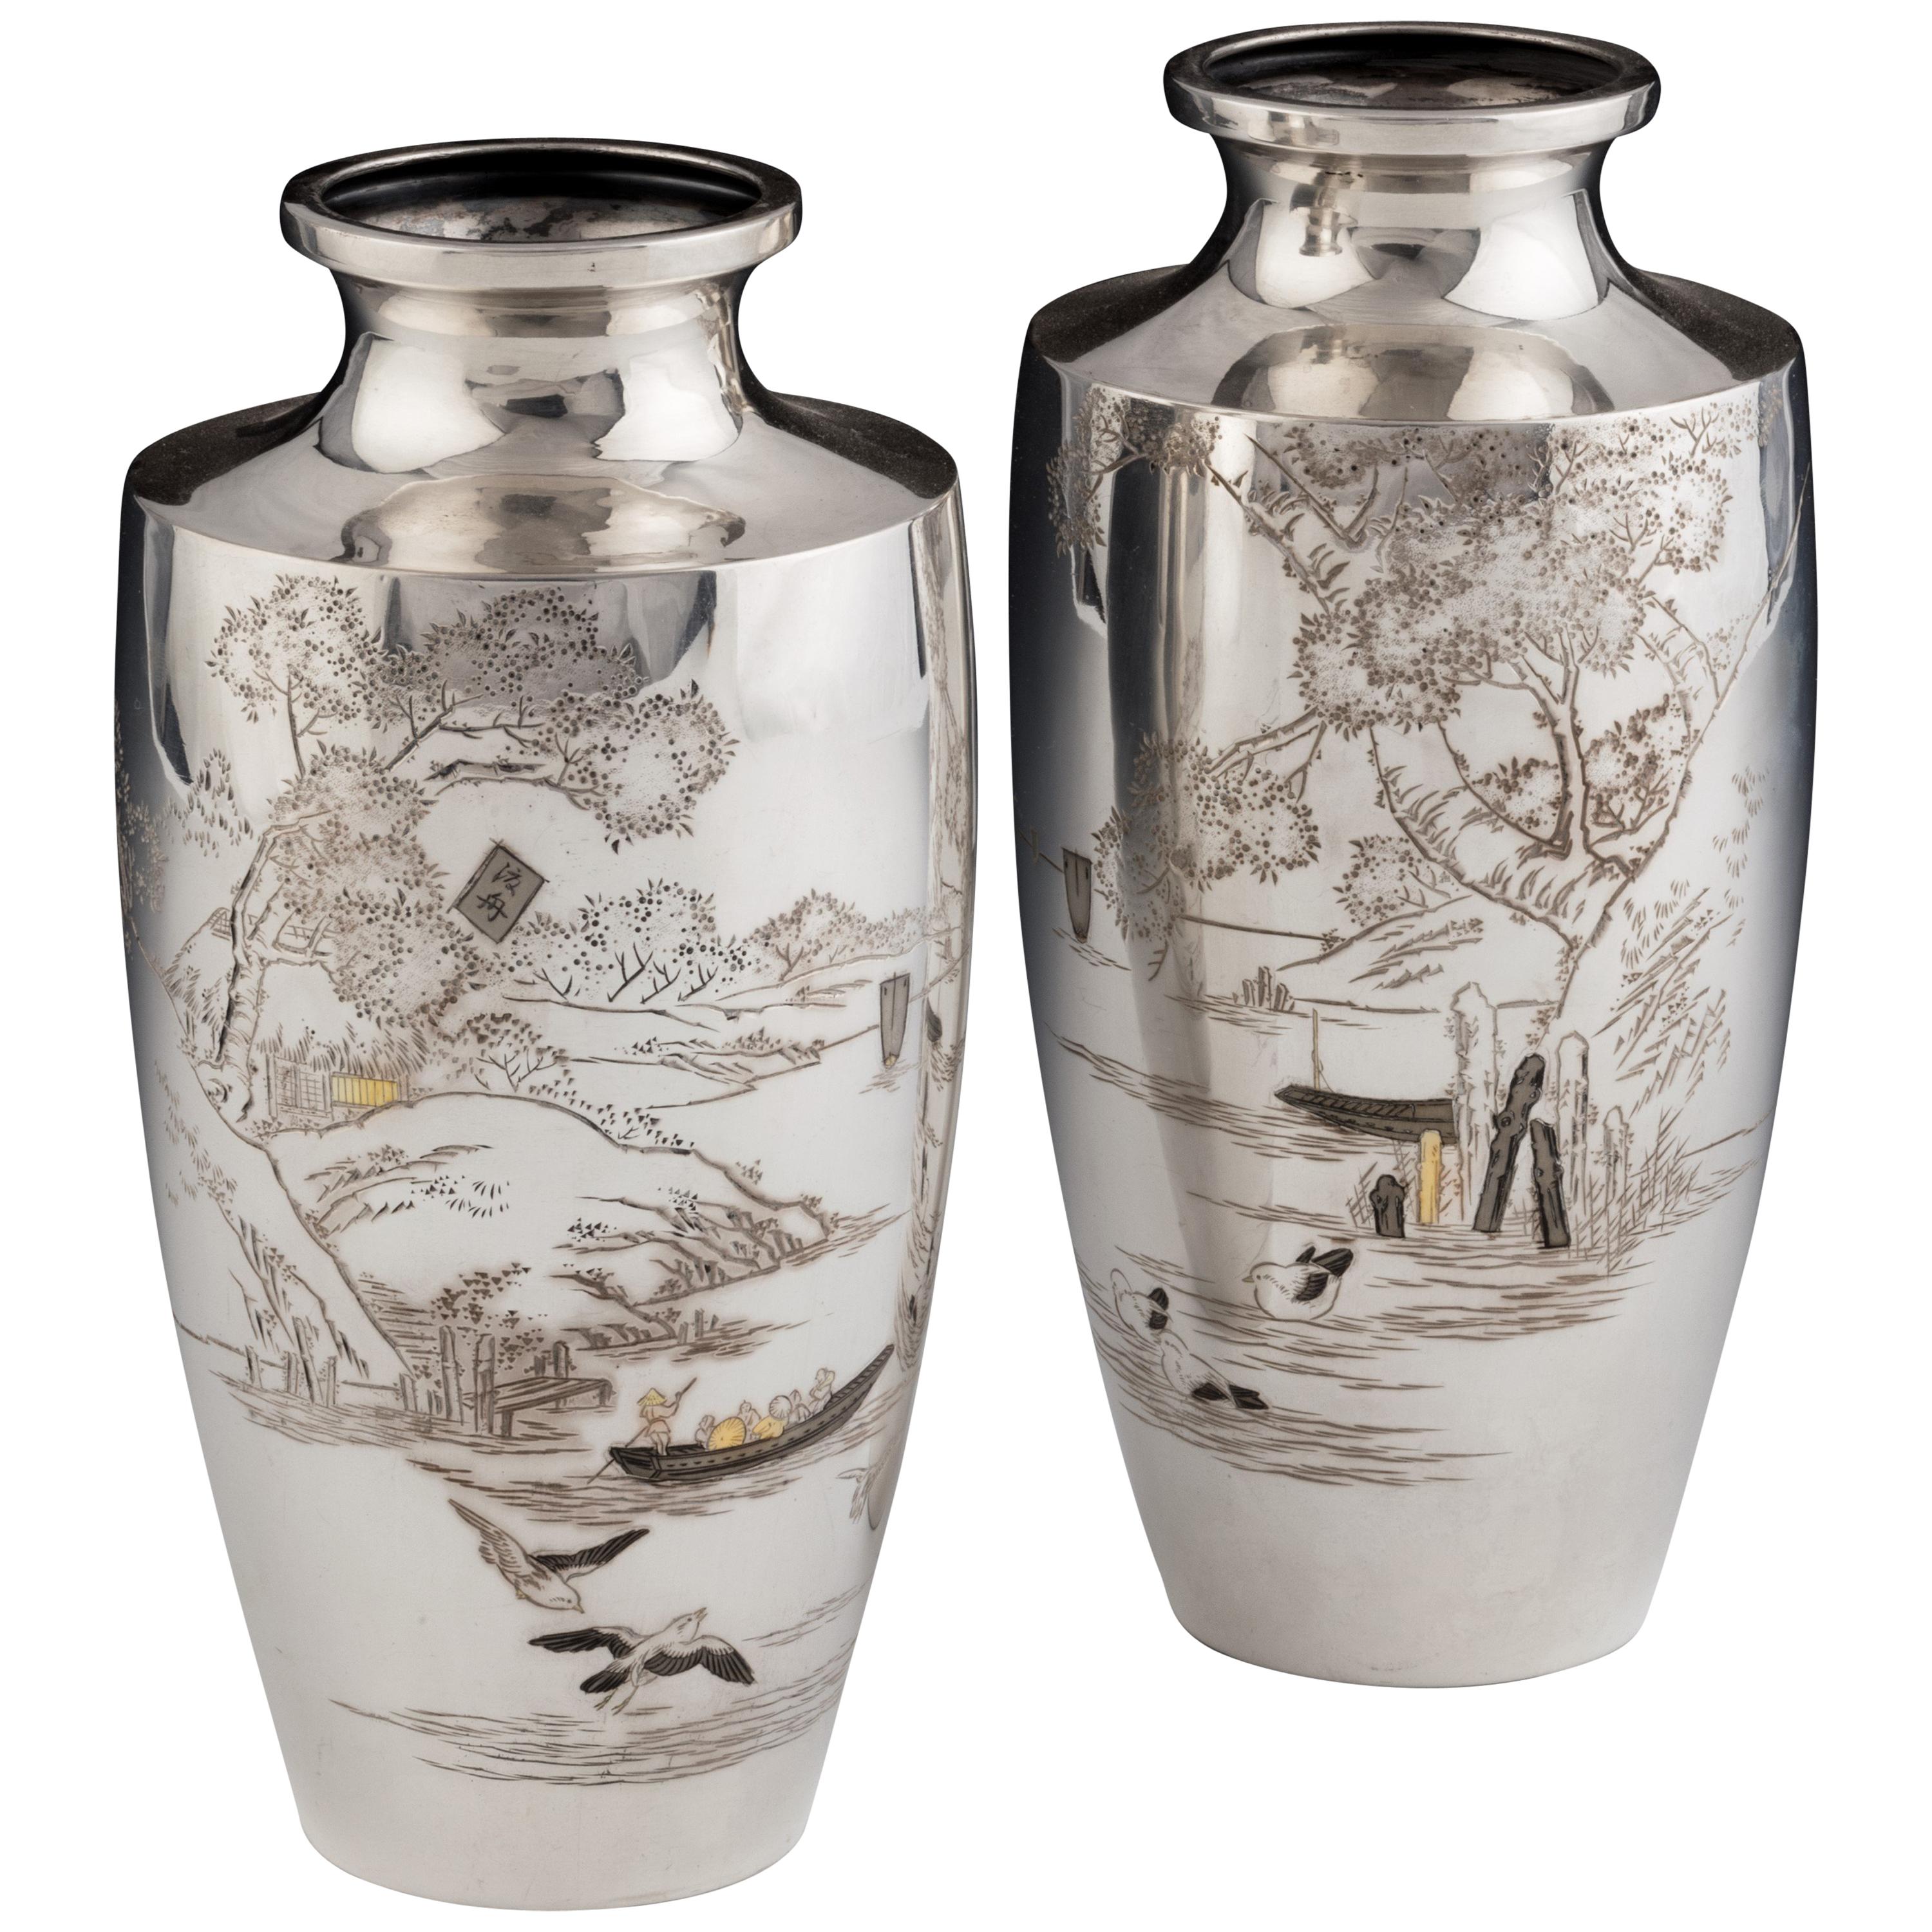 Pair of Taisho Period Silver Vases